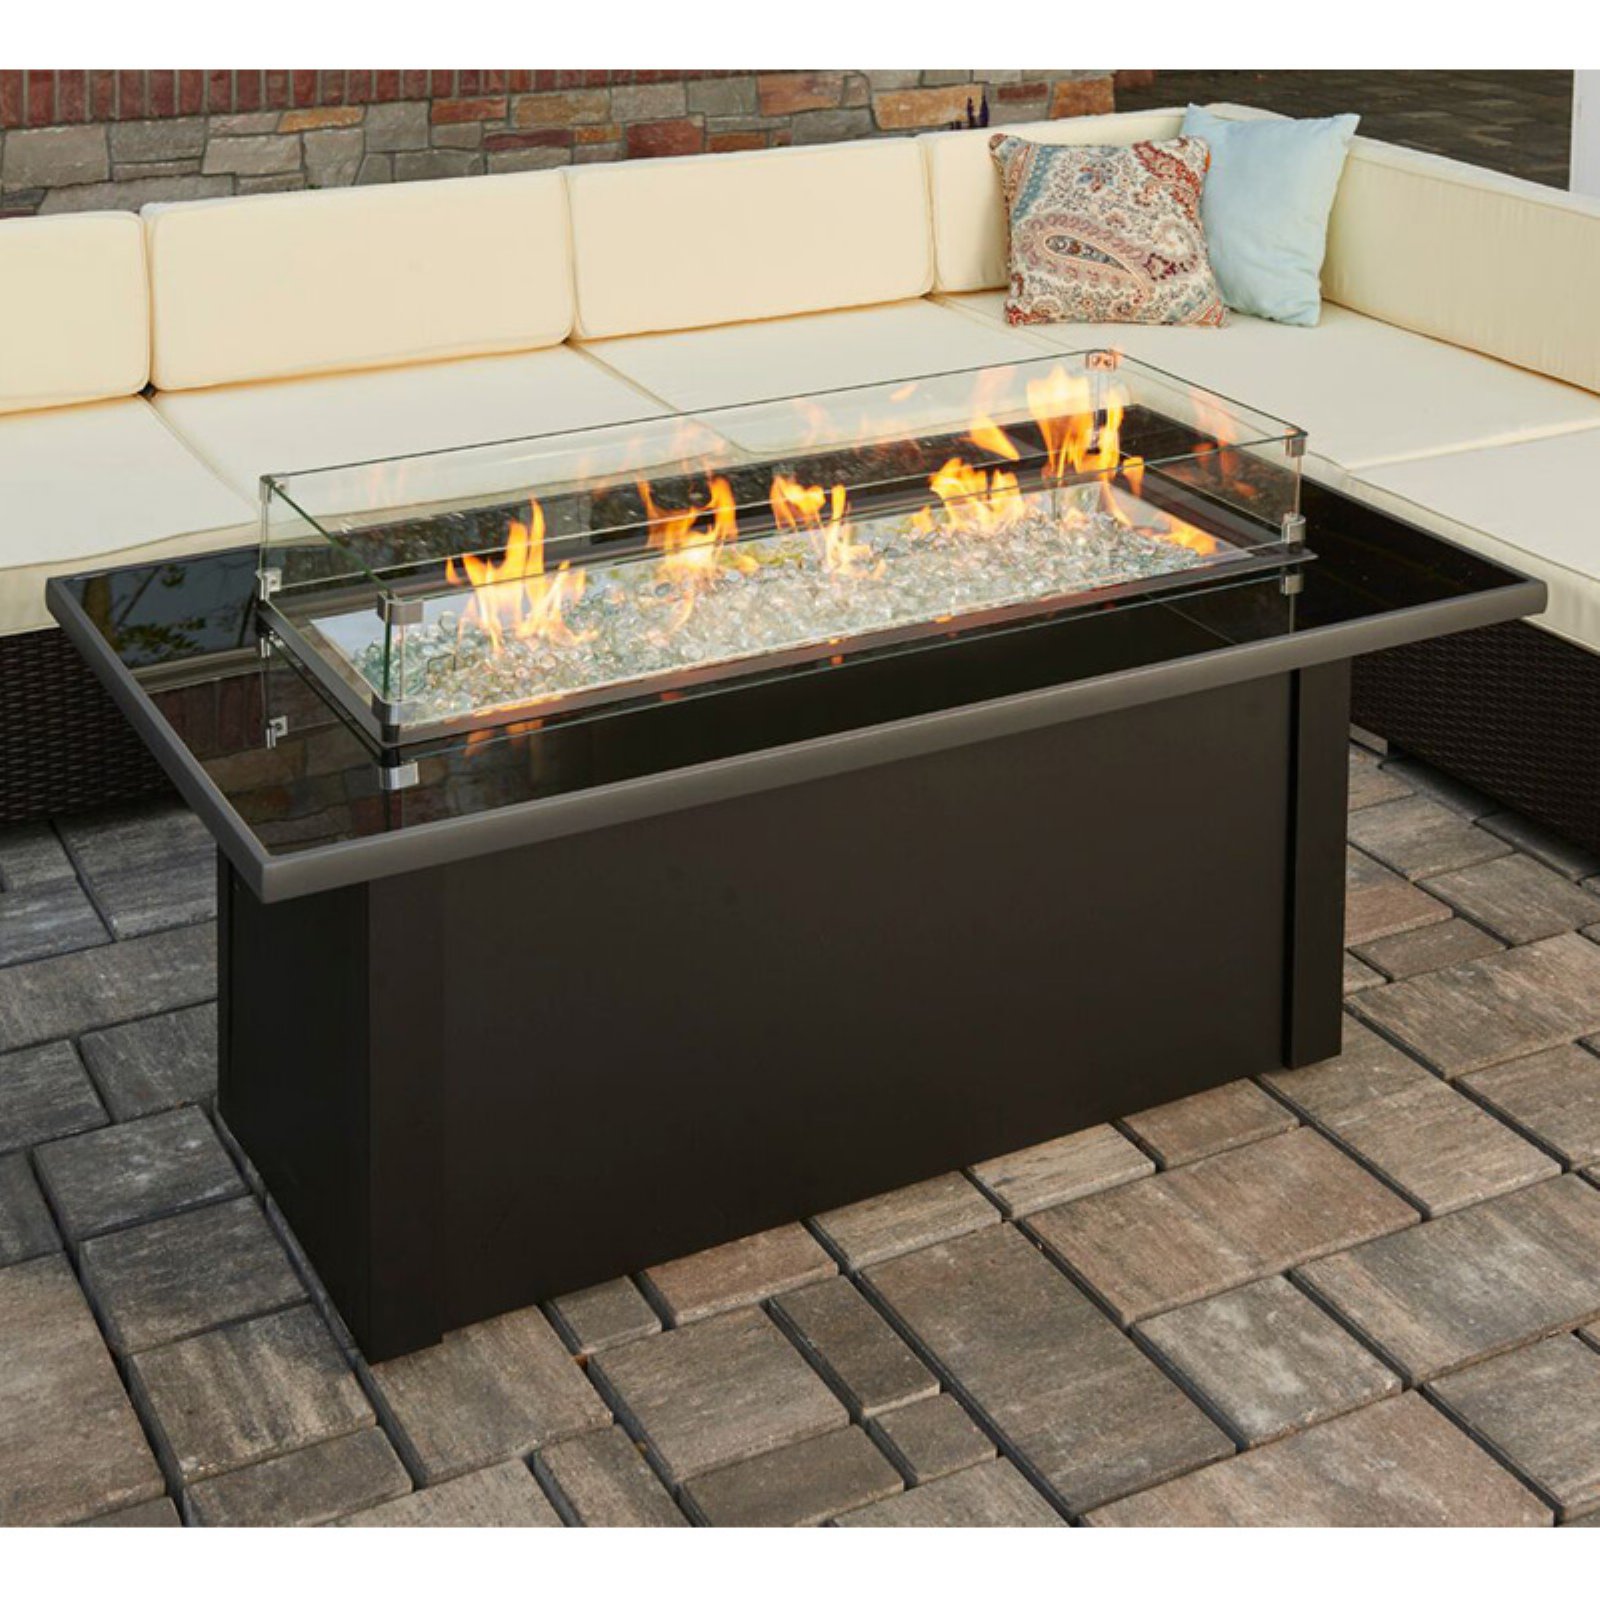 Artificial Fireplace Luxury Outdoor Greatroom Monte Carlo 59 3 In Fire Table with Free Cover